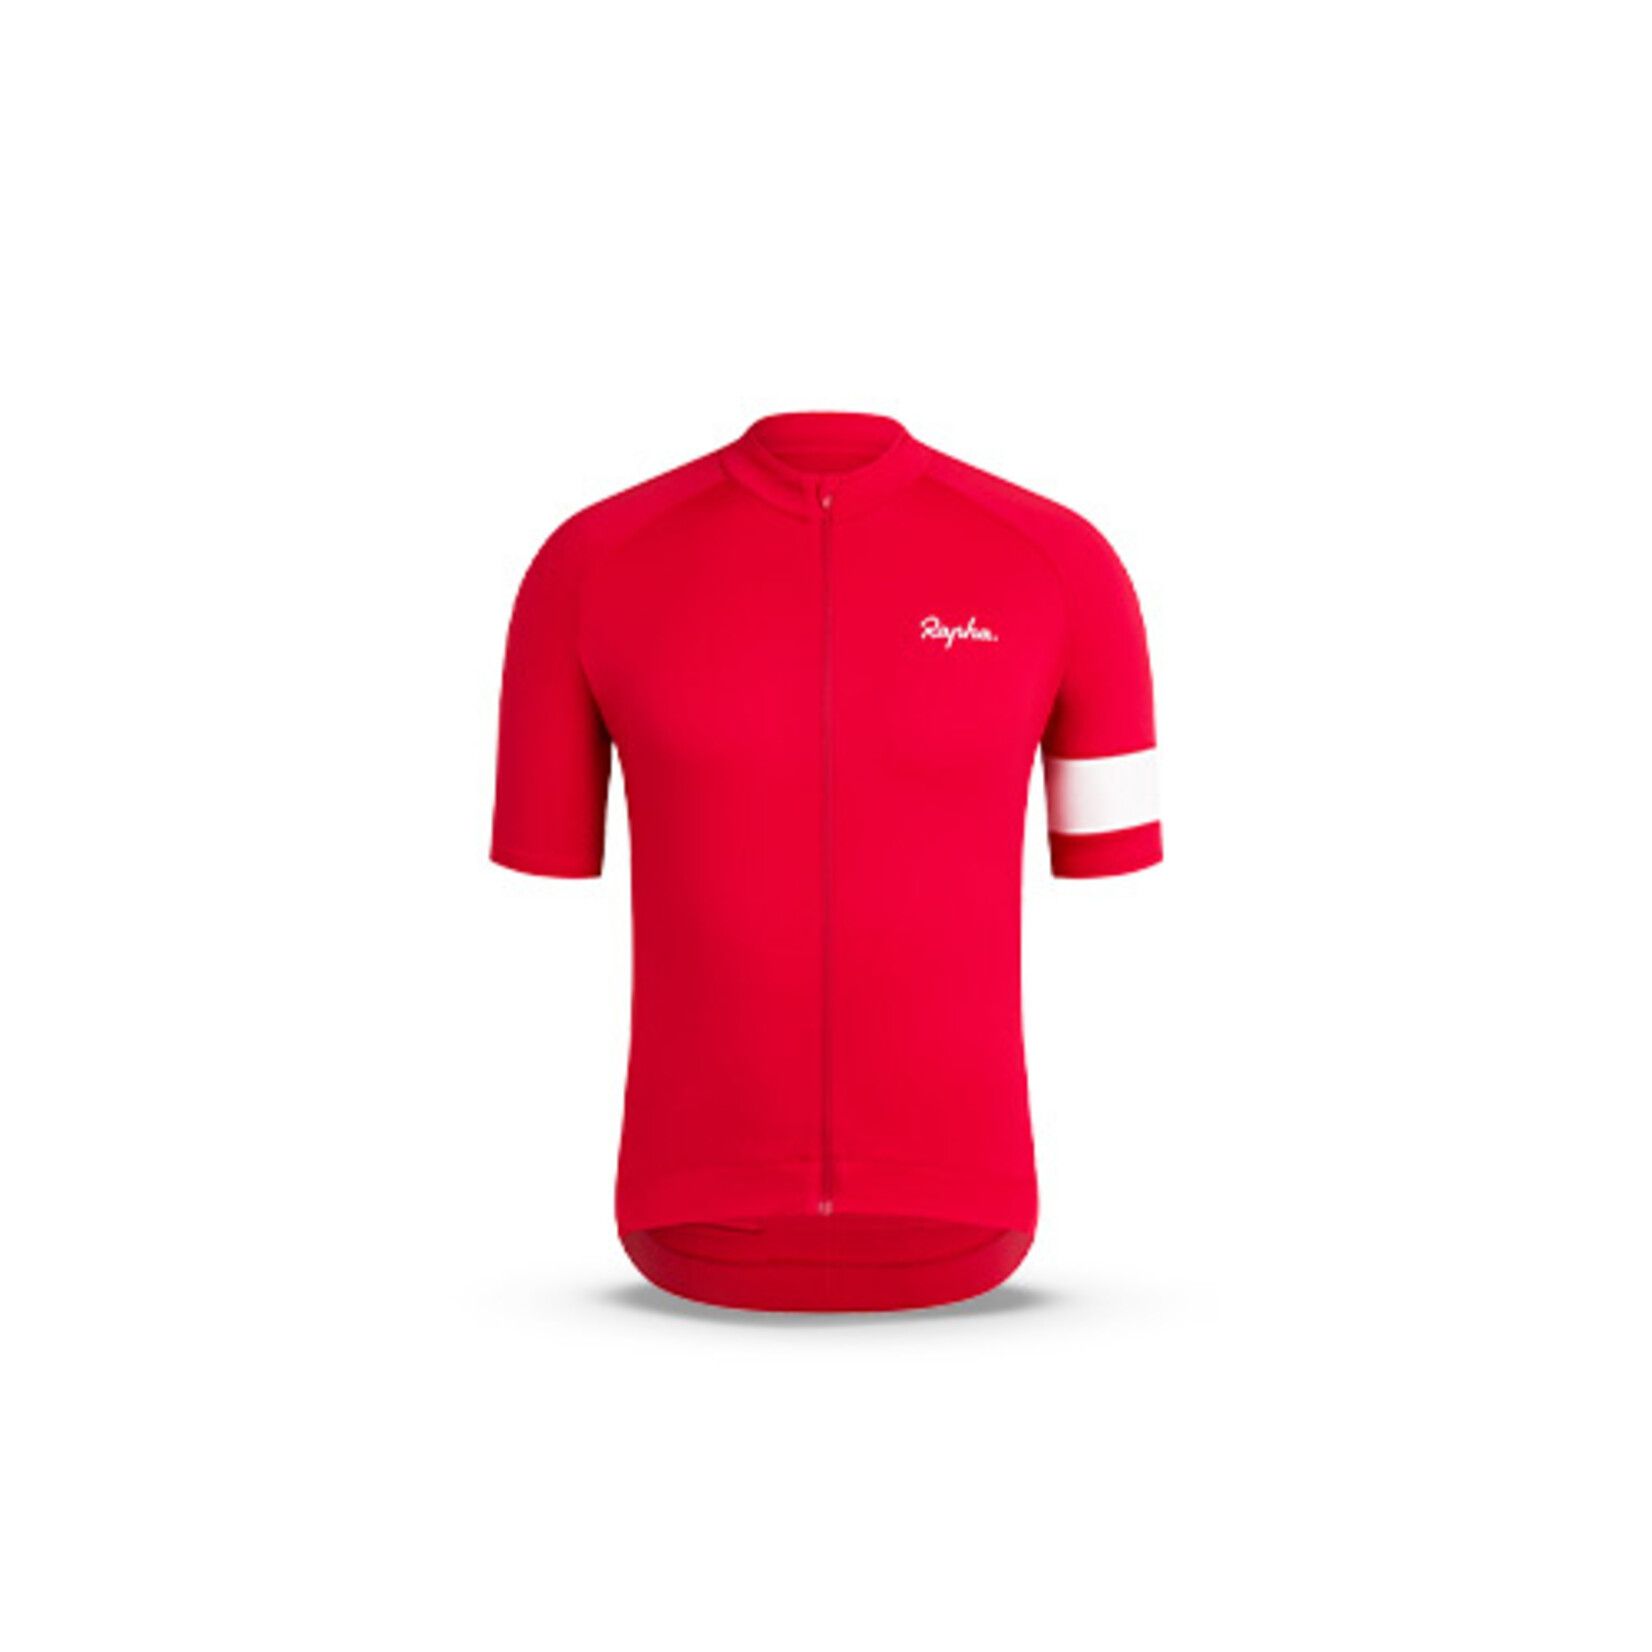 RAPHA RAPHA CORE CYCLING JERSEY RED